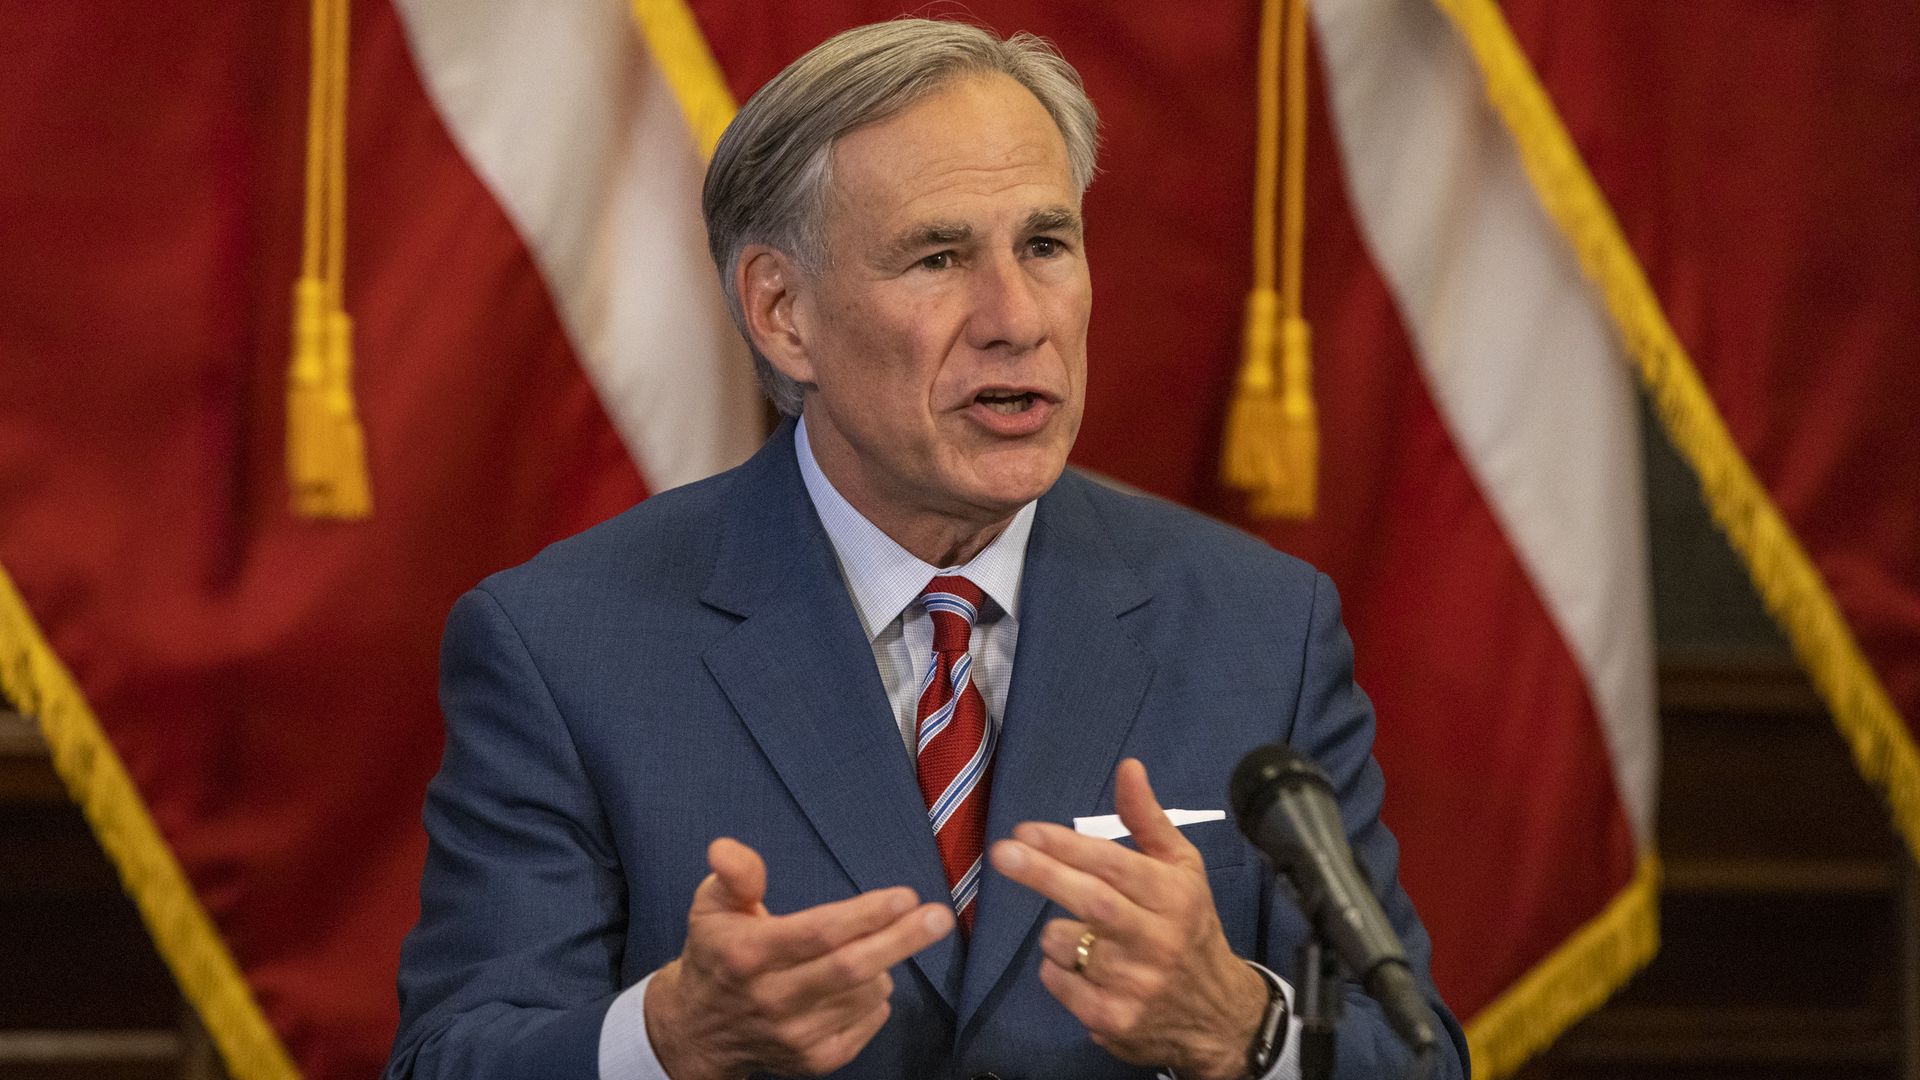 Texas Governor Greg Abbott announces the reopening of more Texas businesses during the COVID-19 pandemic at a press conference at the Texas State Capitol on May 18